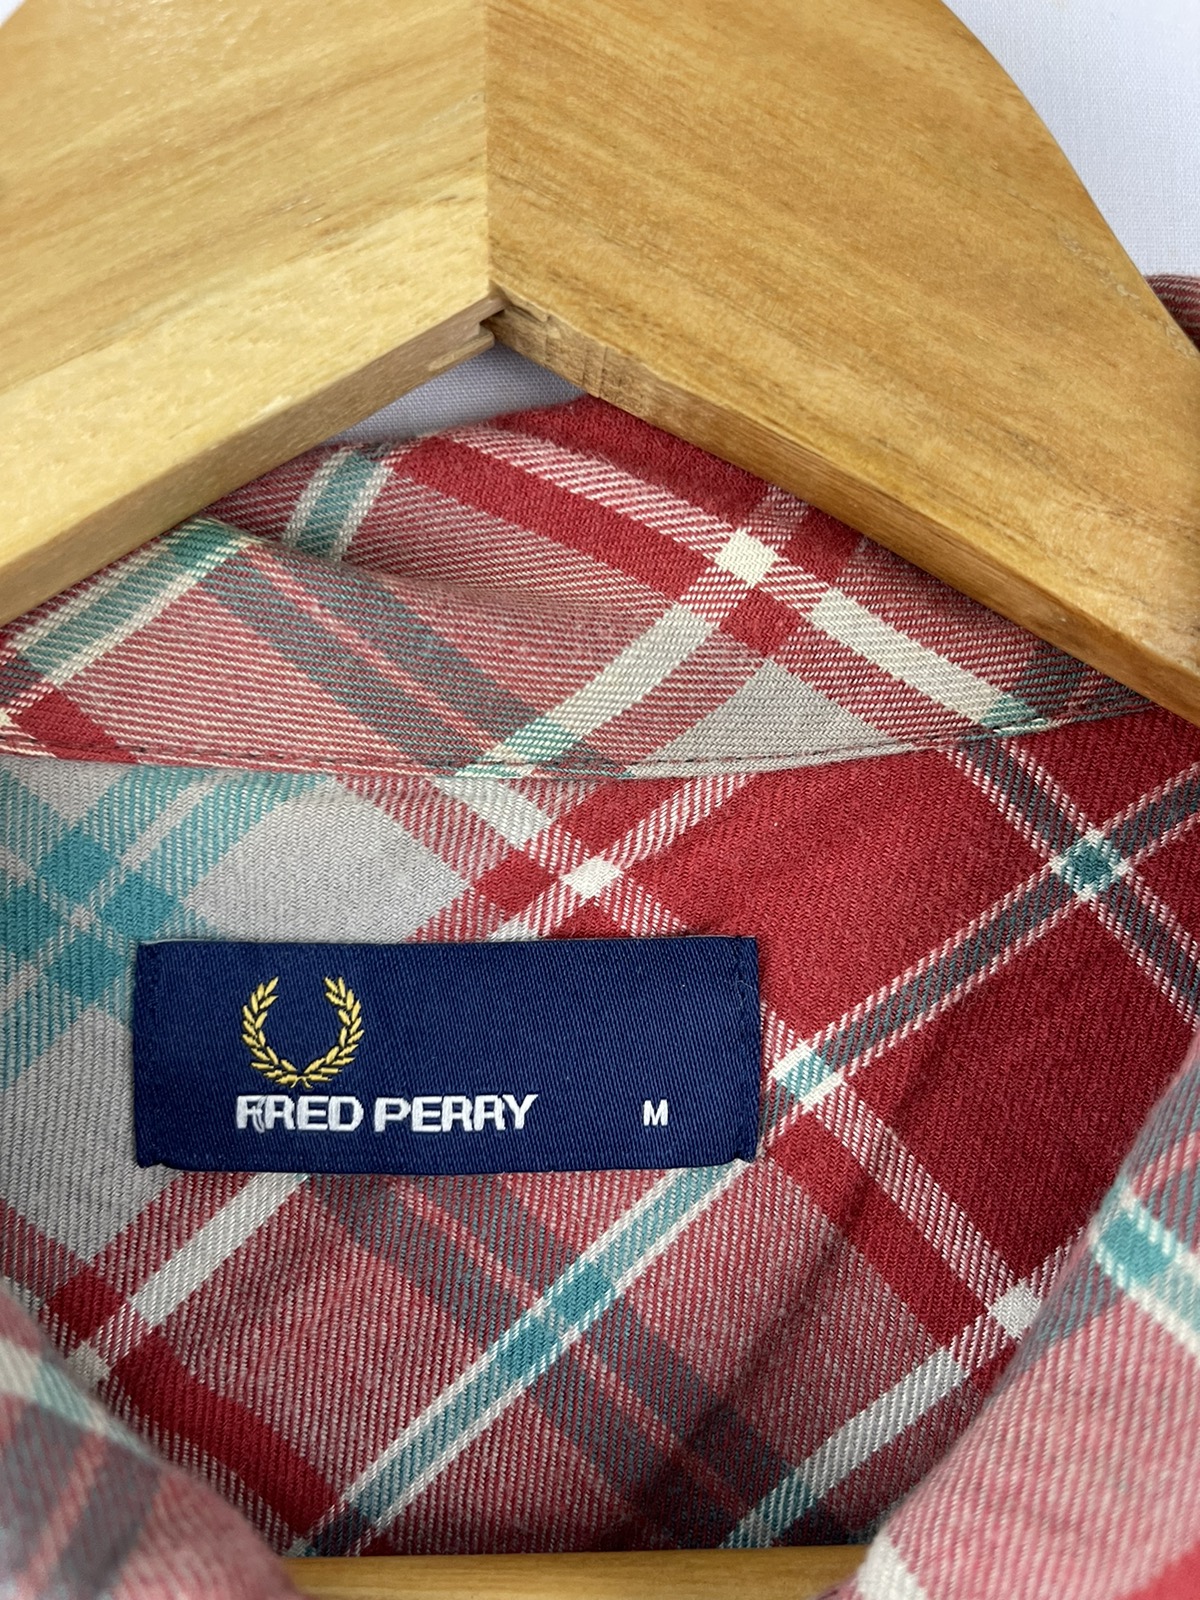 FRED PERRY FULL ZIPPER JACKET CHECKERED - 6